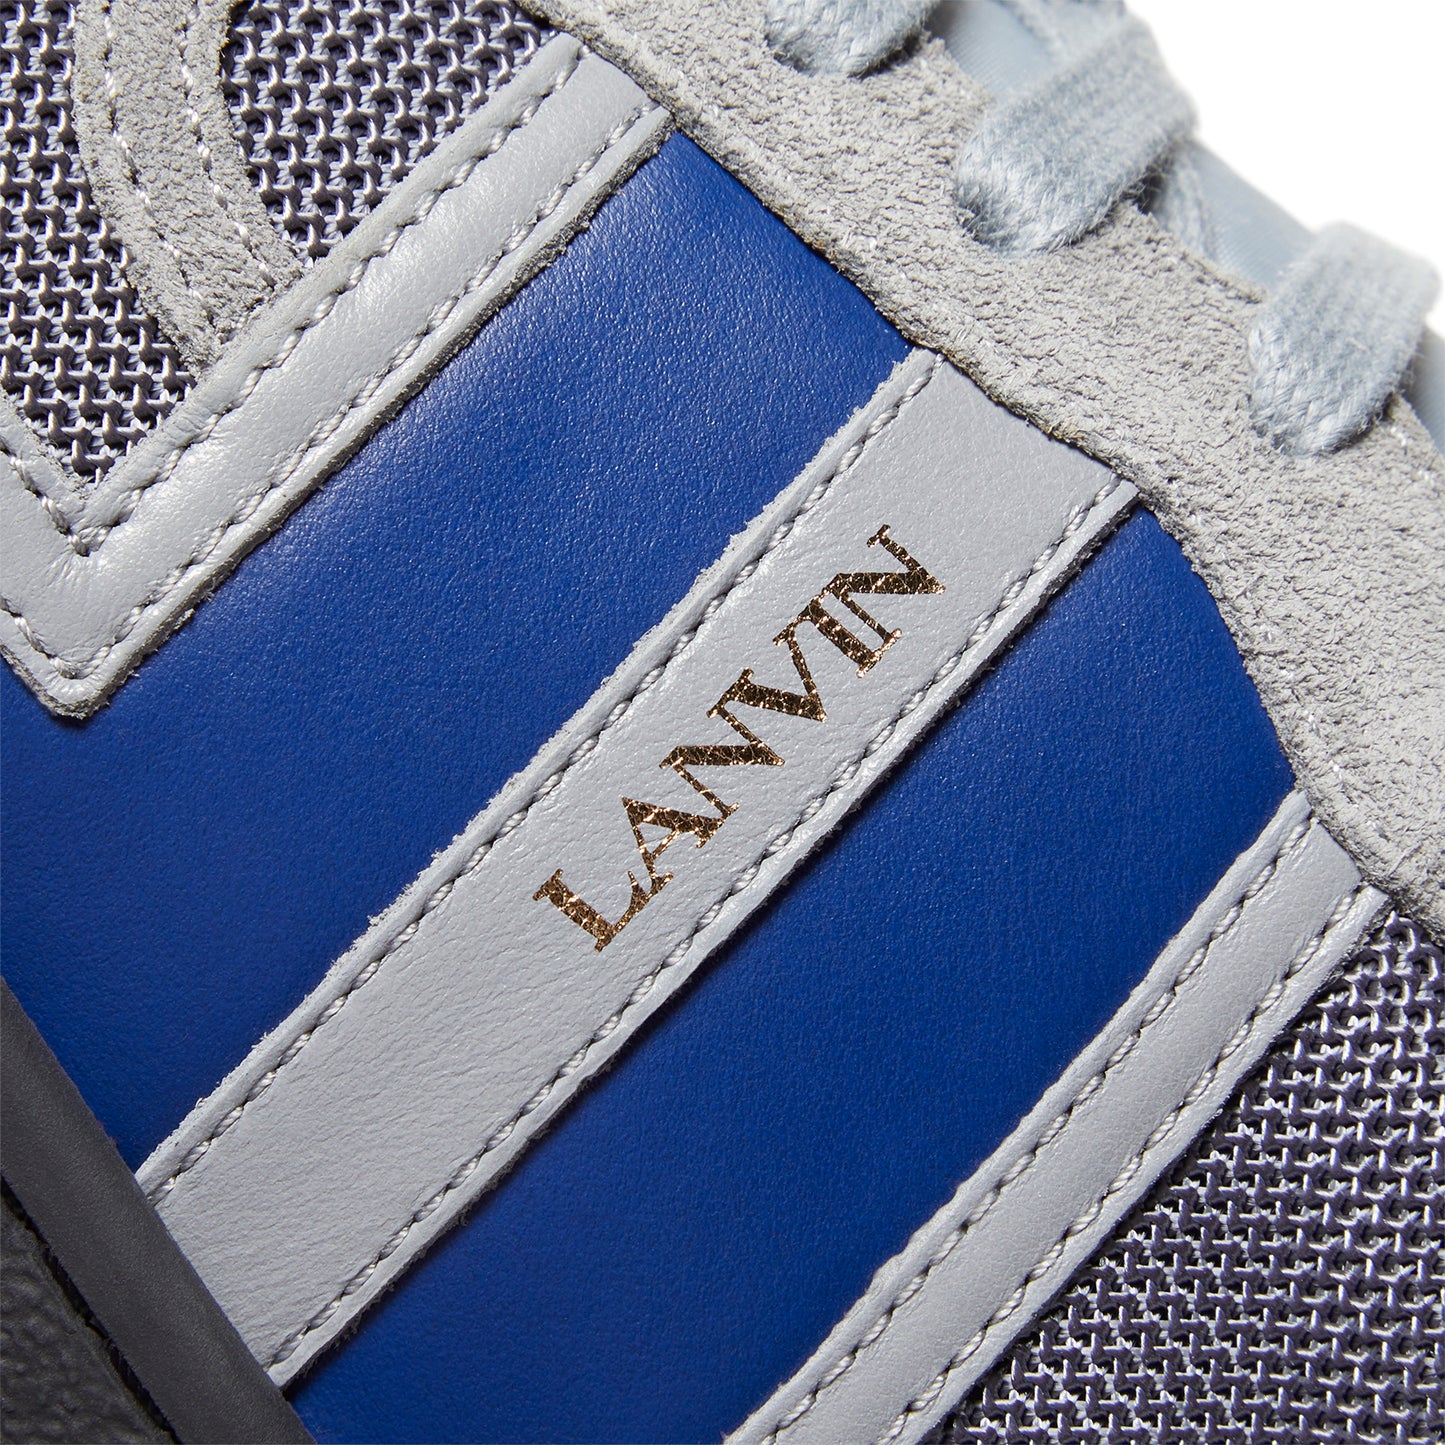 Lanvin Clay Low Top Sneakers (Anthracite/Blue)